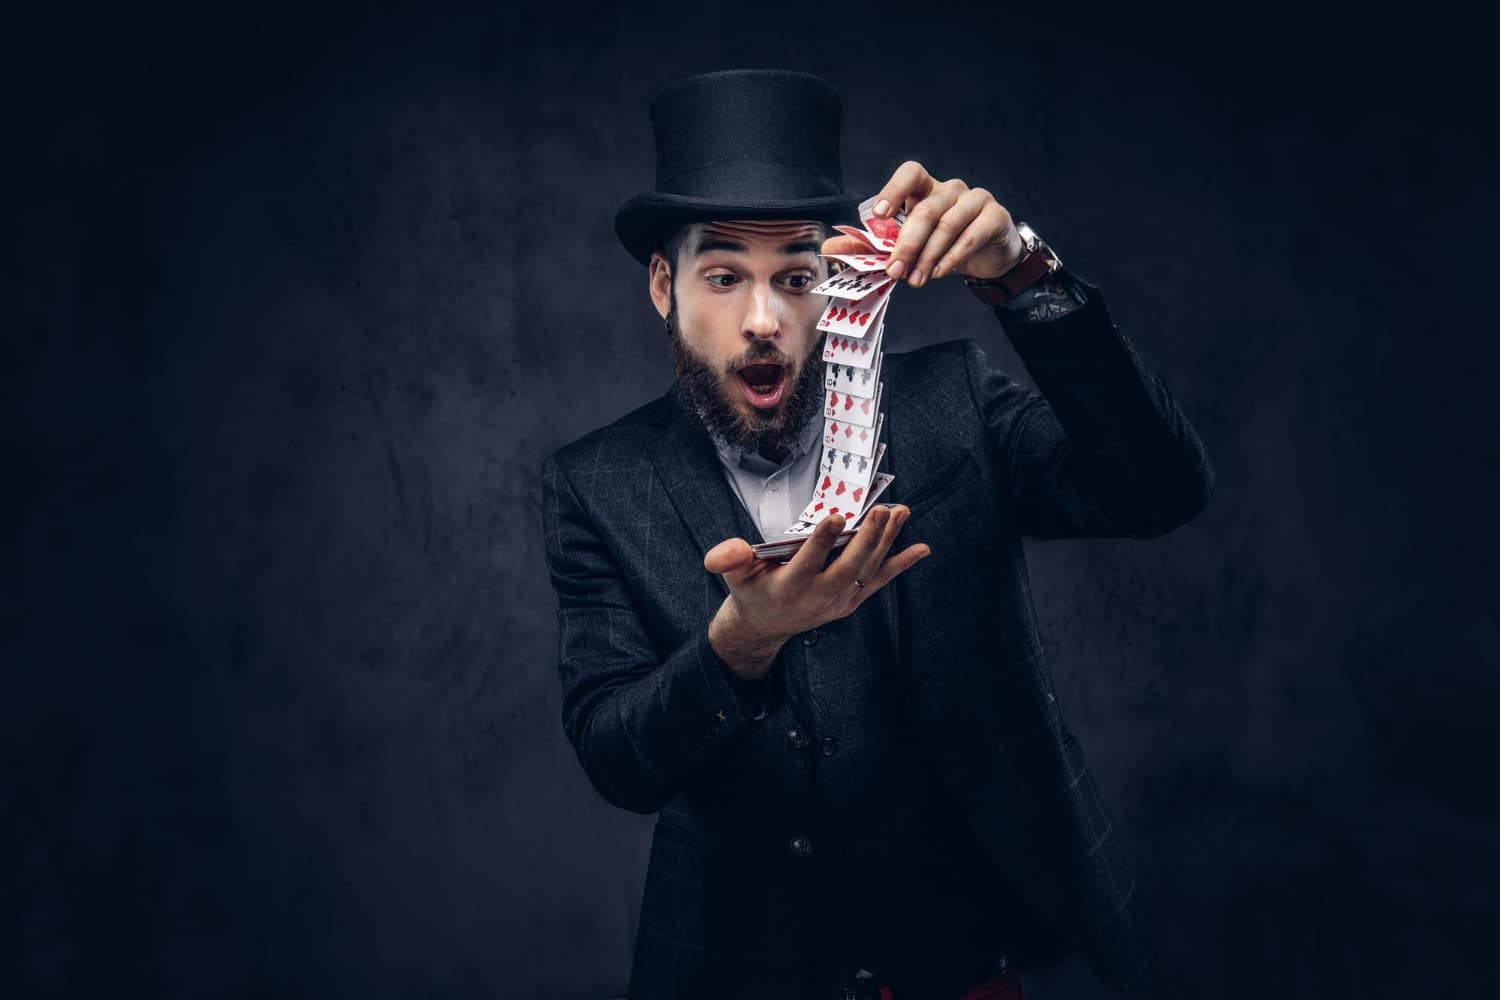 bearded magician black suit top hat showing trick with playing cards dark background